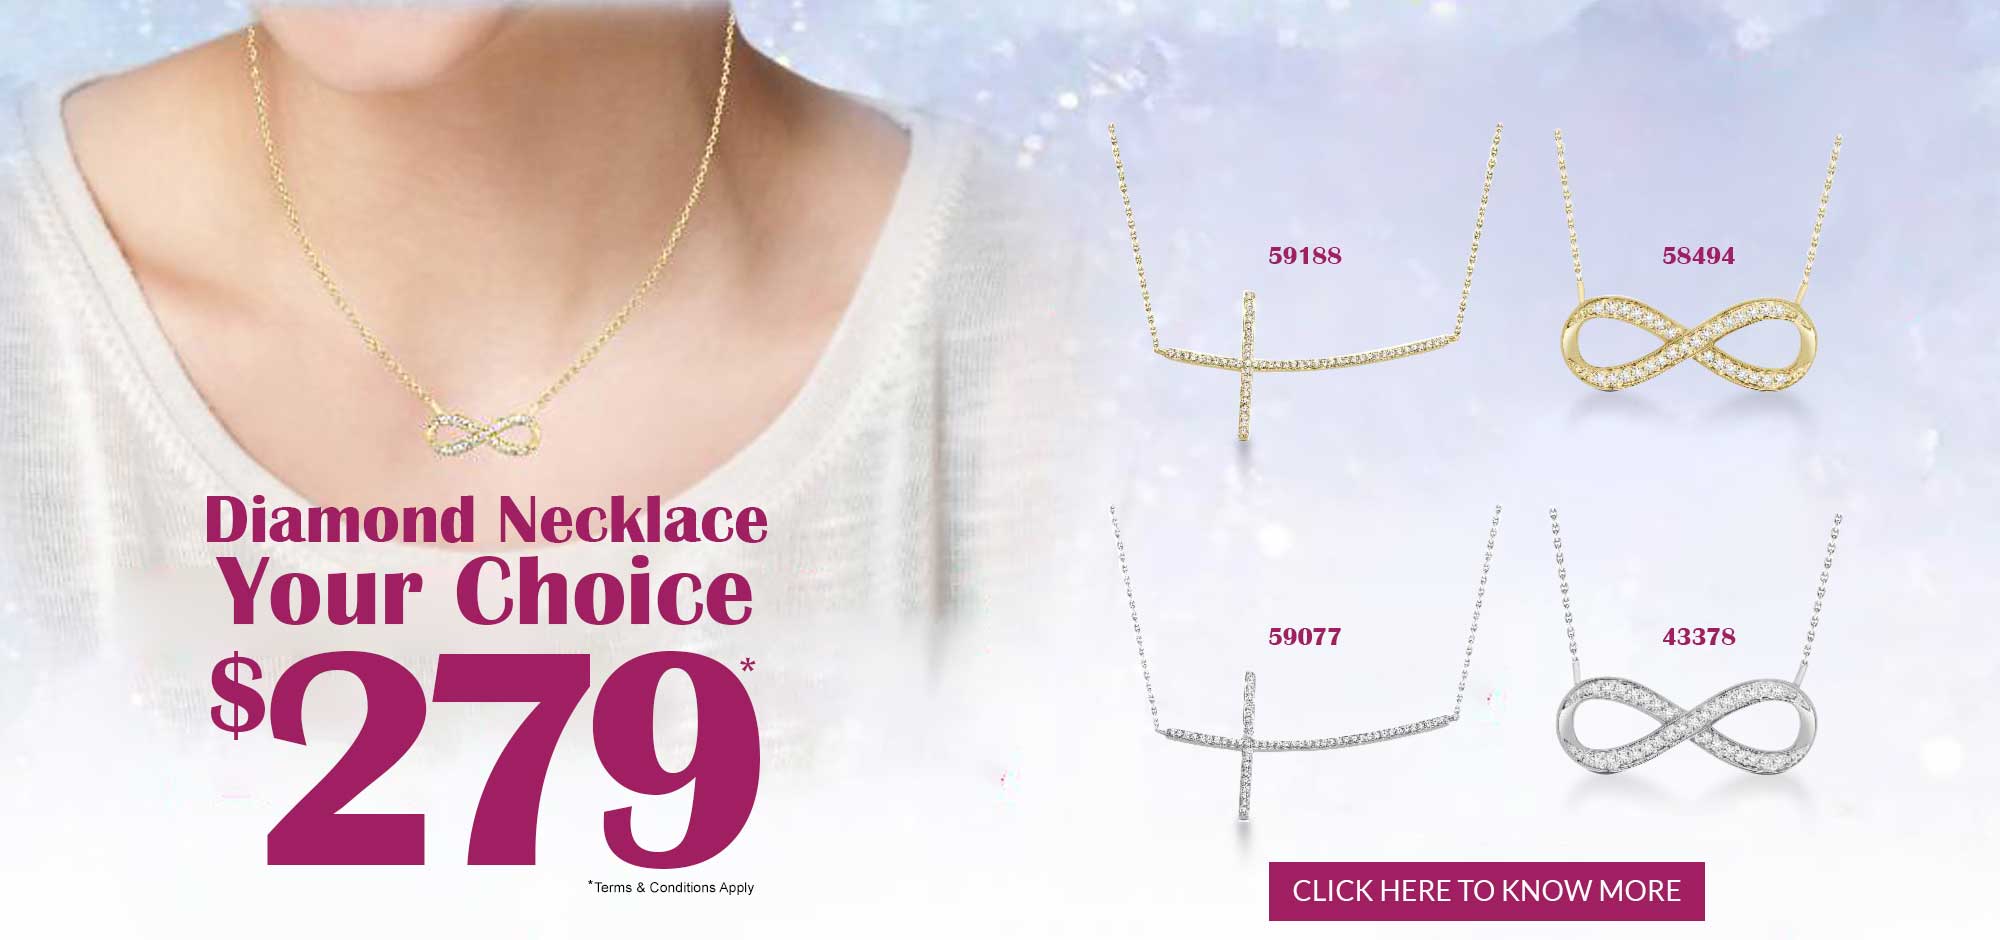 Diamond Necklace Sale at Baggett's Jewelry